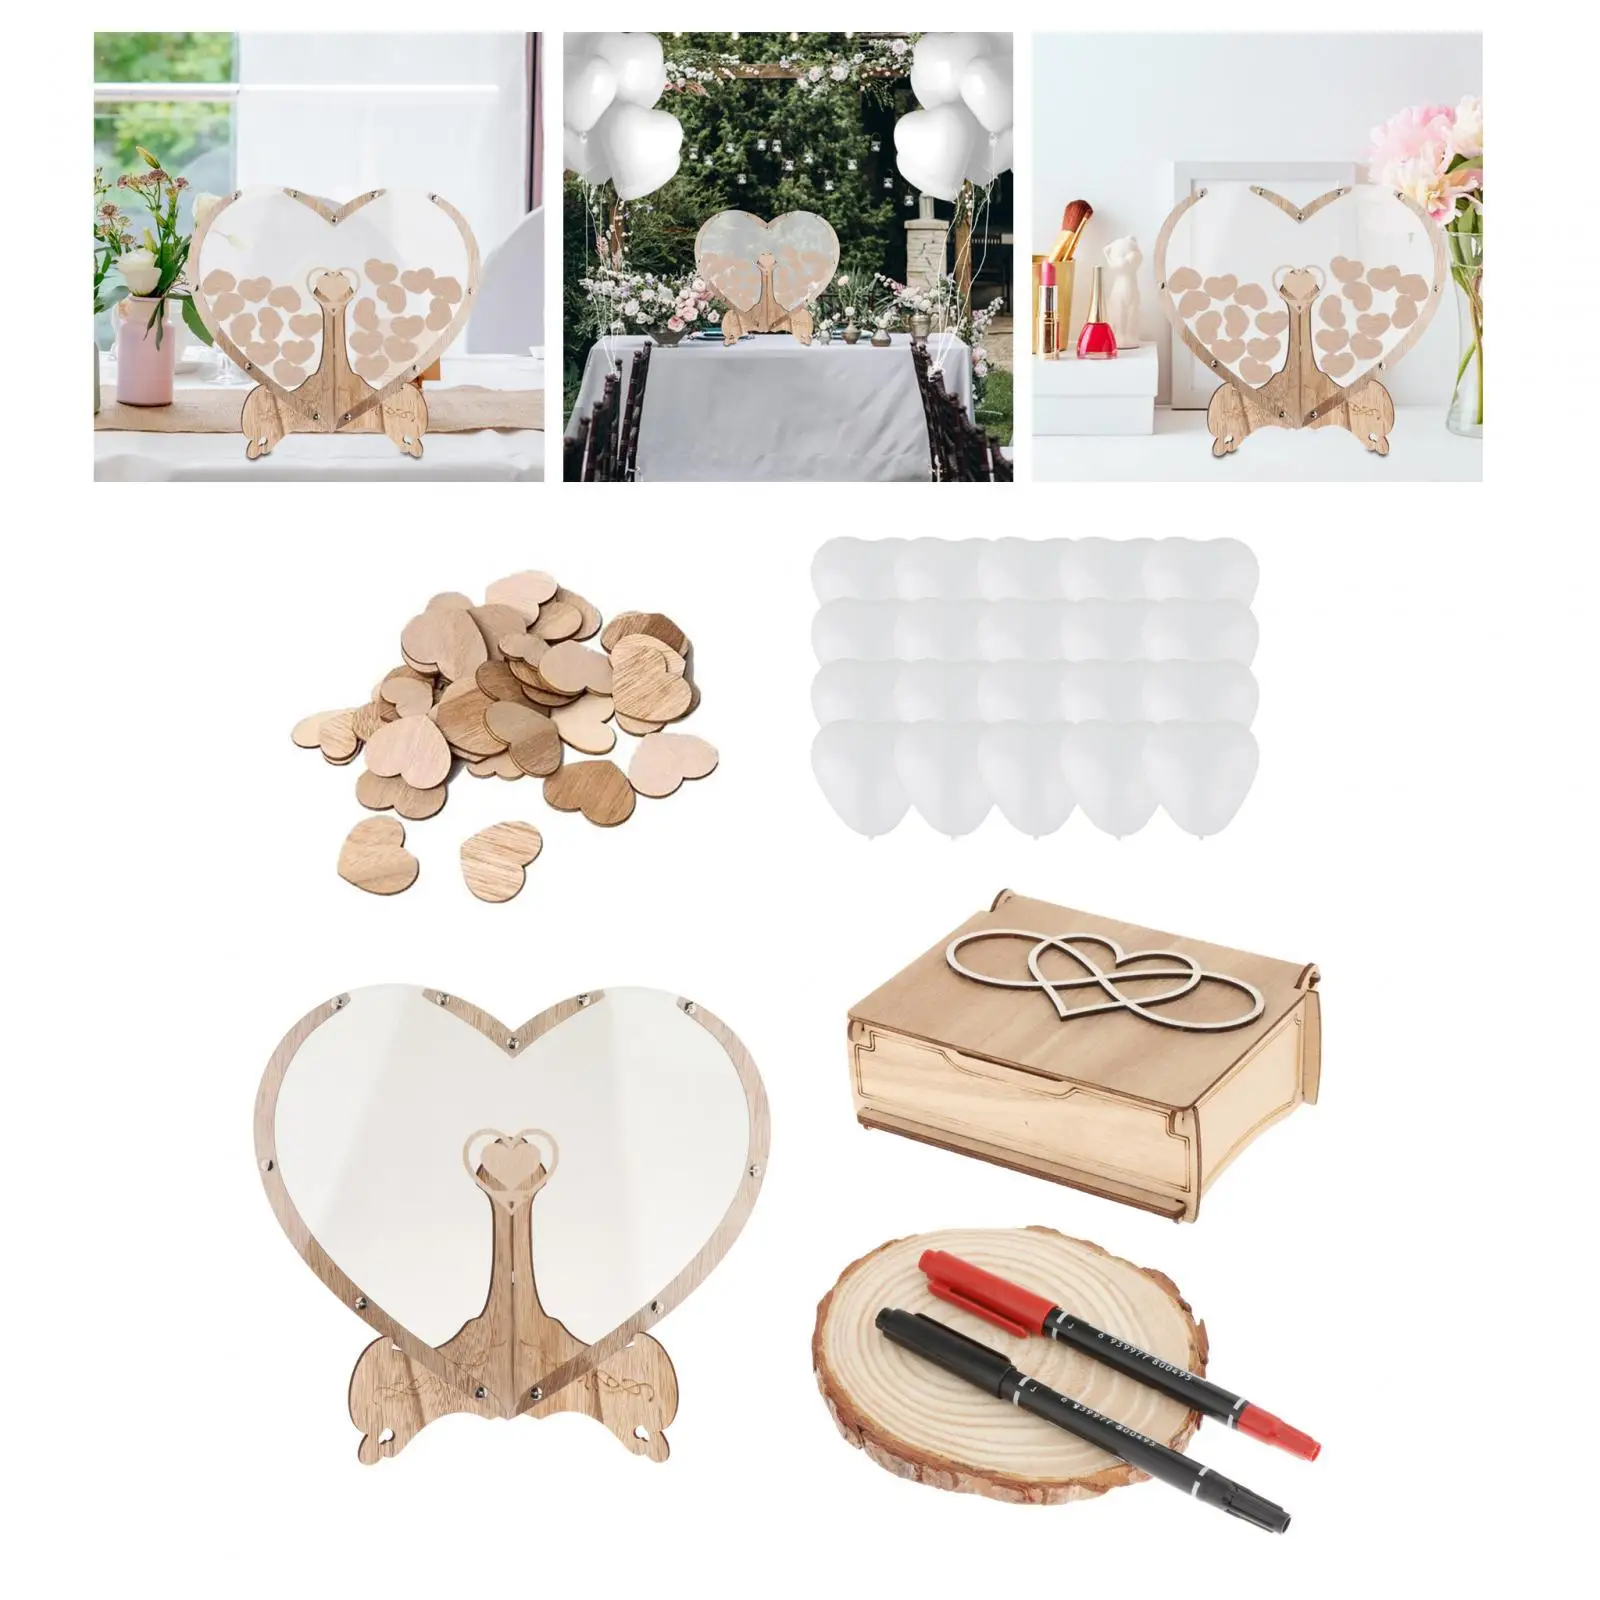 Heart Wedding Guest Book Visitors wood Frame Drop Box Wedding Guest Book for Birthday Party Centerpieces